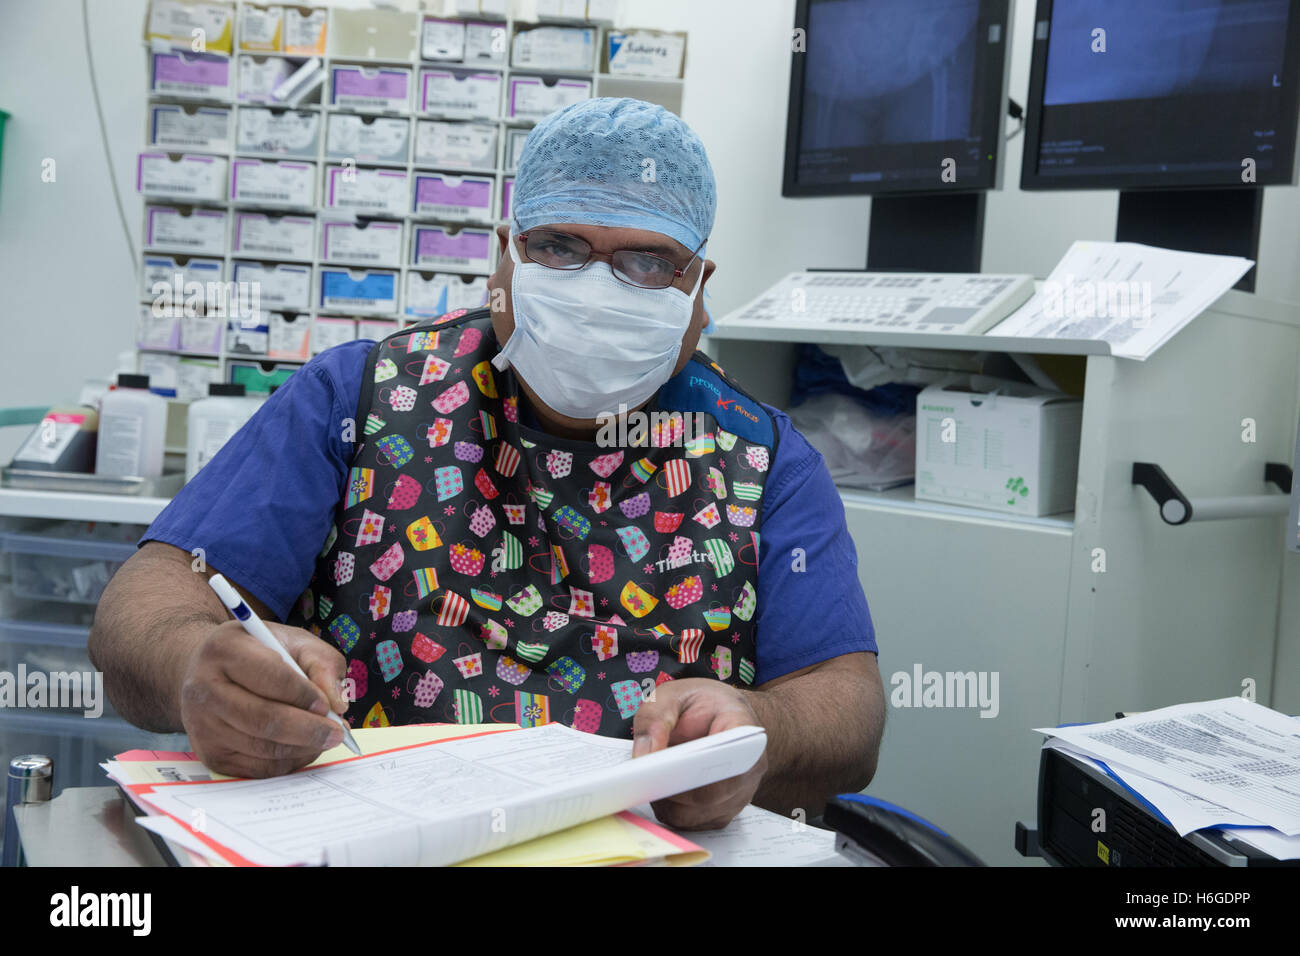 A hospital nurse wearing scrubs and a surgical mask in an operating theatre makes notes during an operation Stock Photo